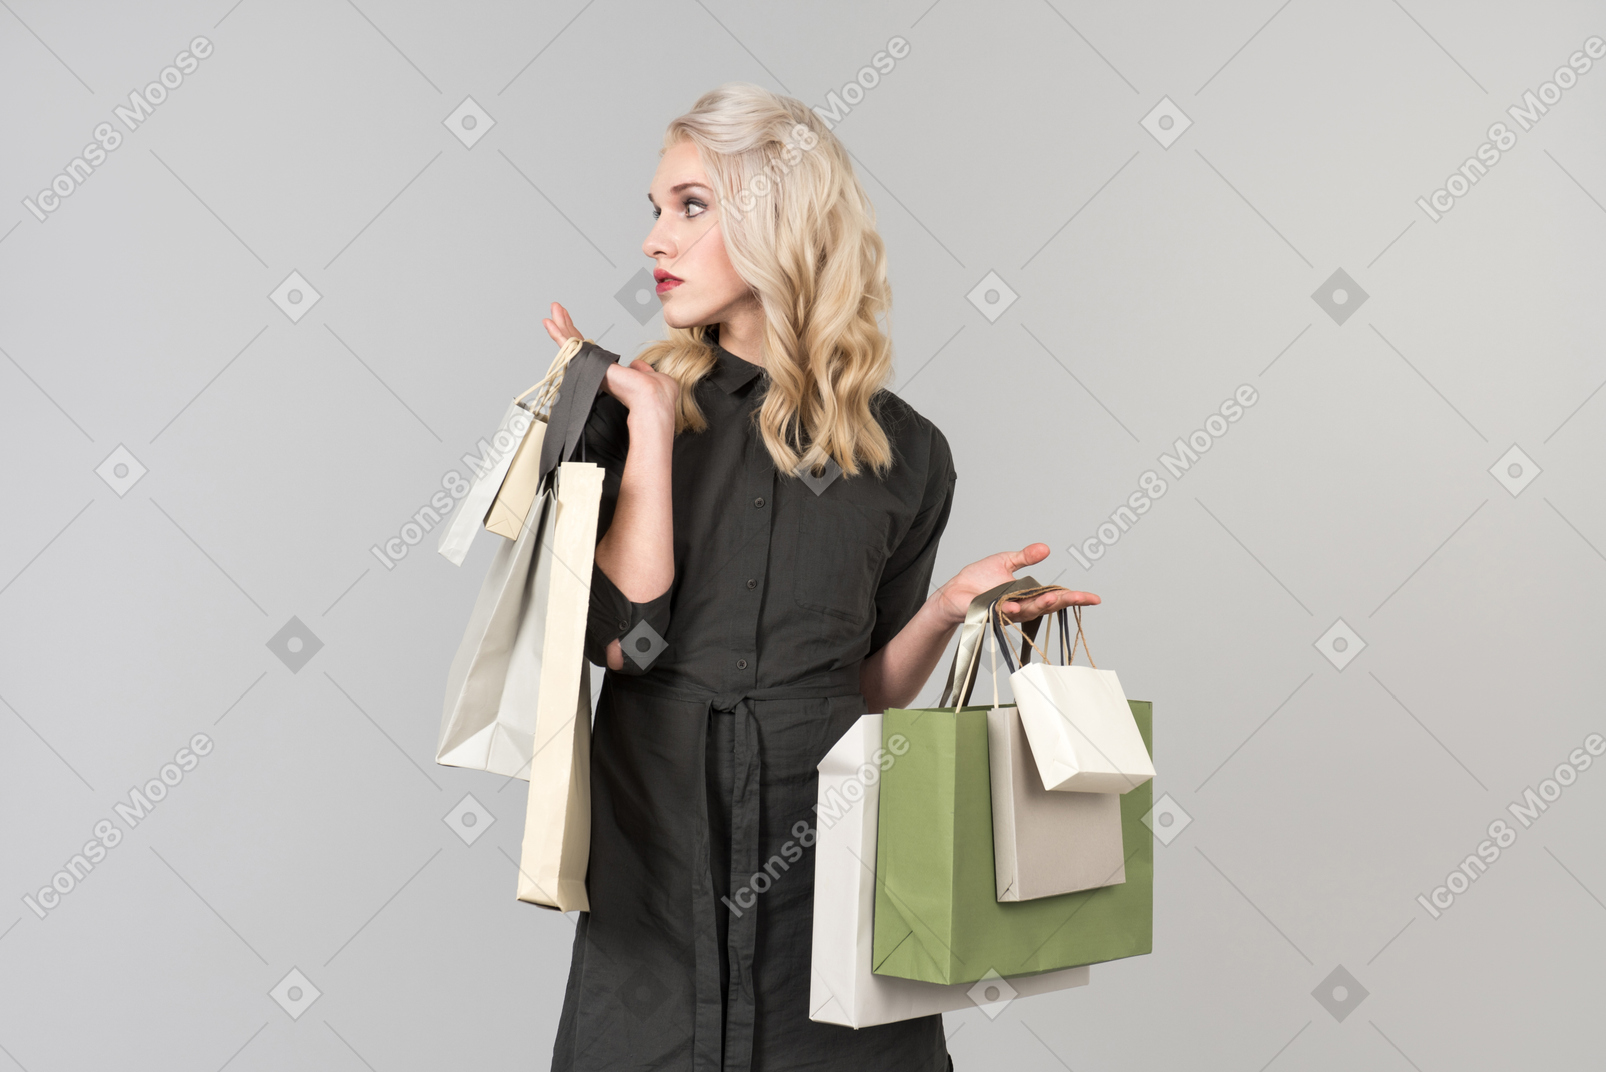 A young beautiful blond-haired person in a black dress holding a bunch of shopping bags in both of their hands